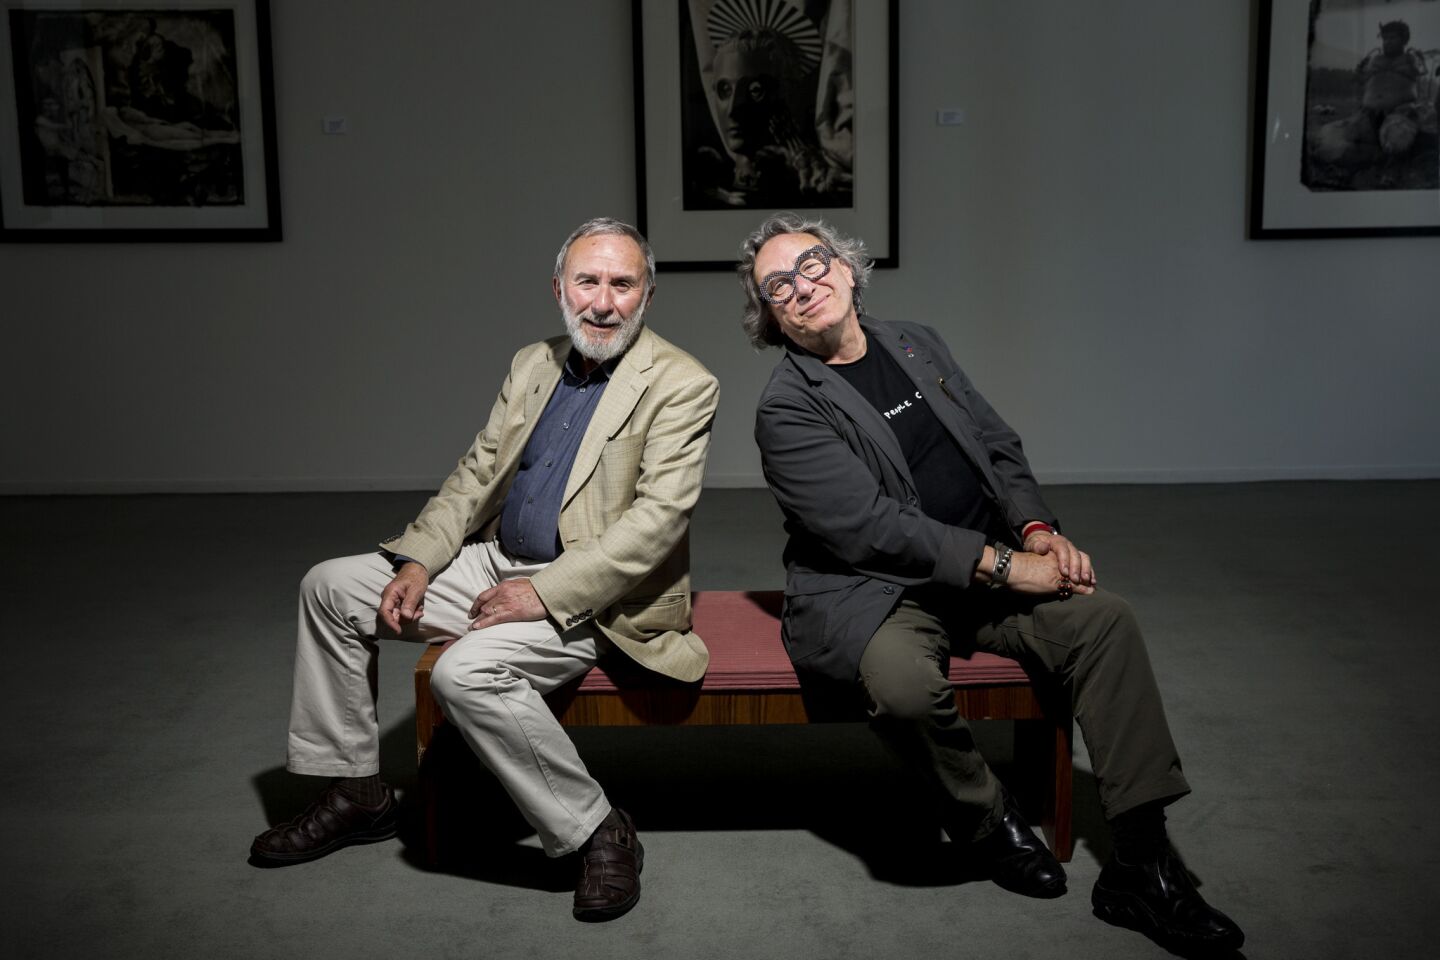 Twin Brothers Jerome, left, and Joel-Peter Witkin opened their first joint show, "Twin Visions: Jerome Witkin and Joel-Peter Witkin," at Jack Rutberg Fine Arts in Los Angeles. The show explores Jerome's painting and Joel-Peter's photography.